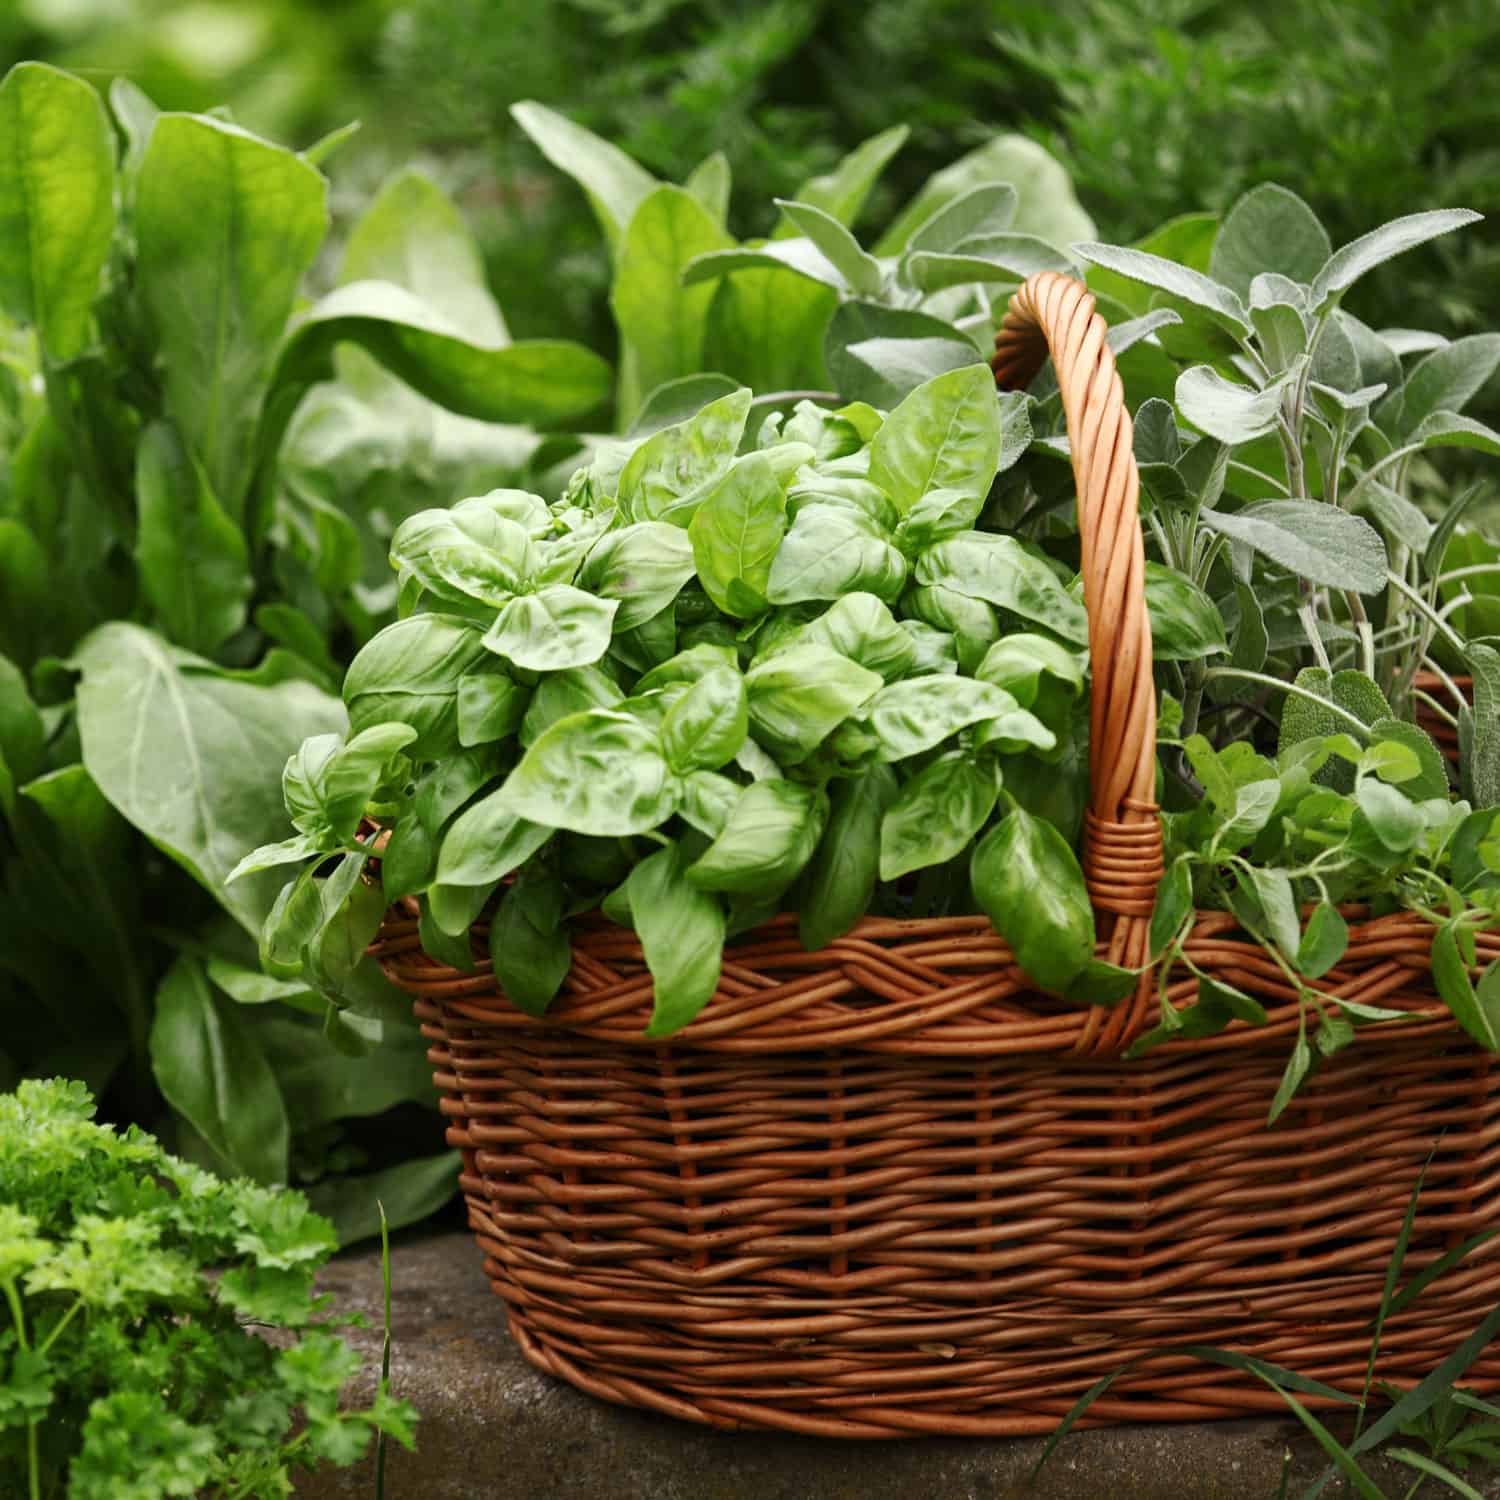 A garden basket filled with garden herbs for cooking